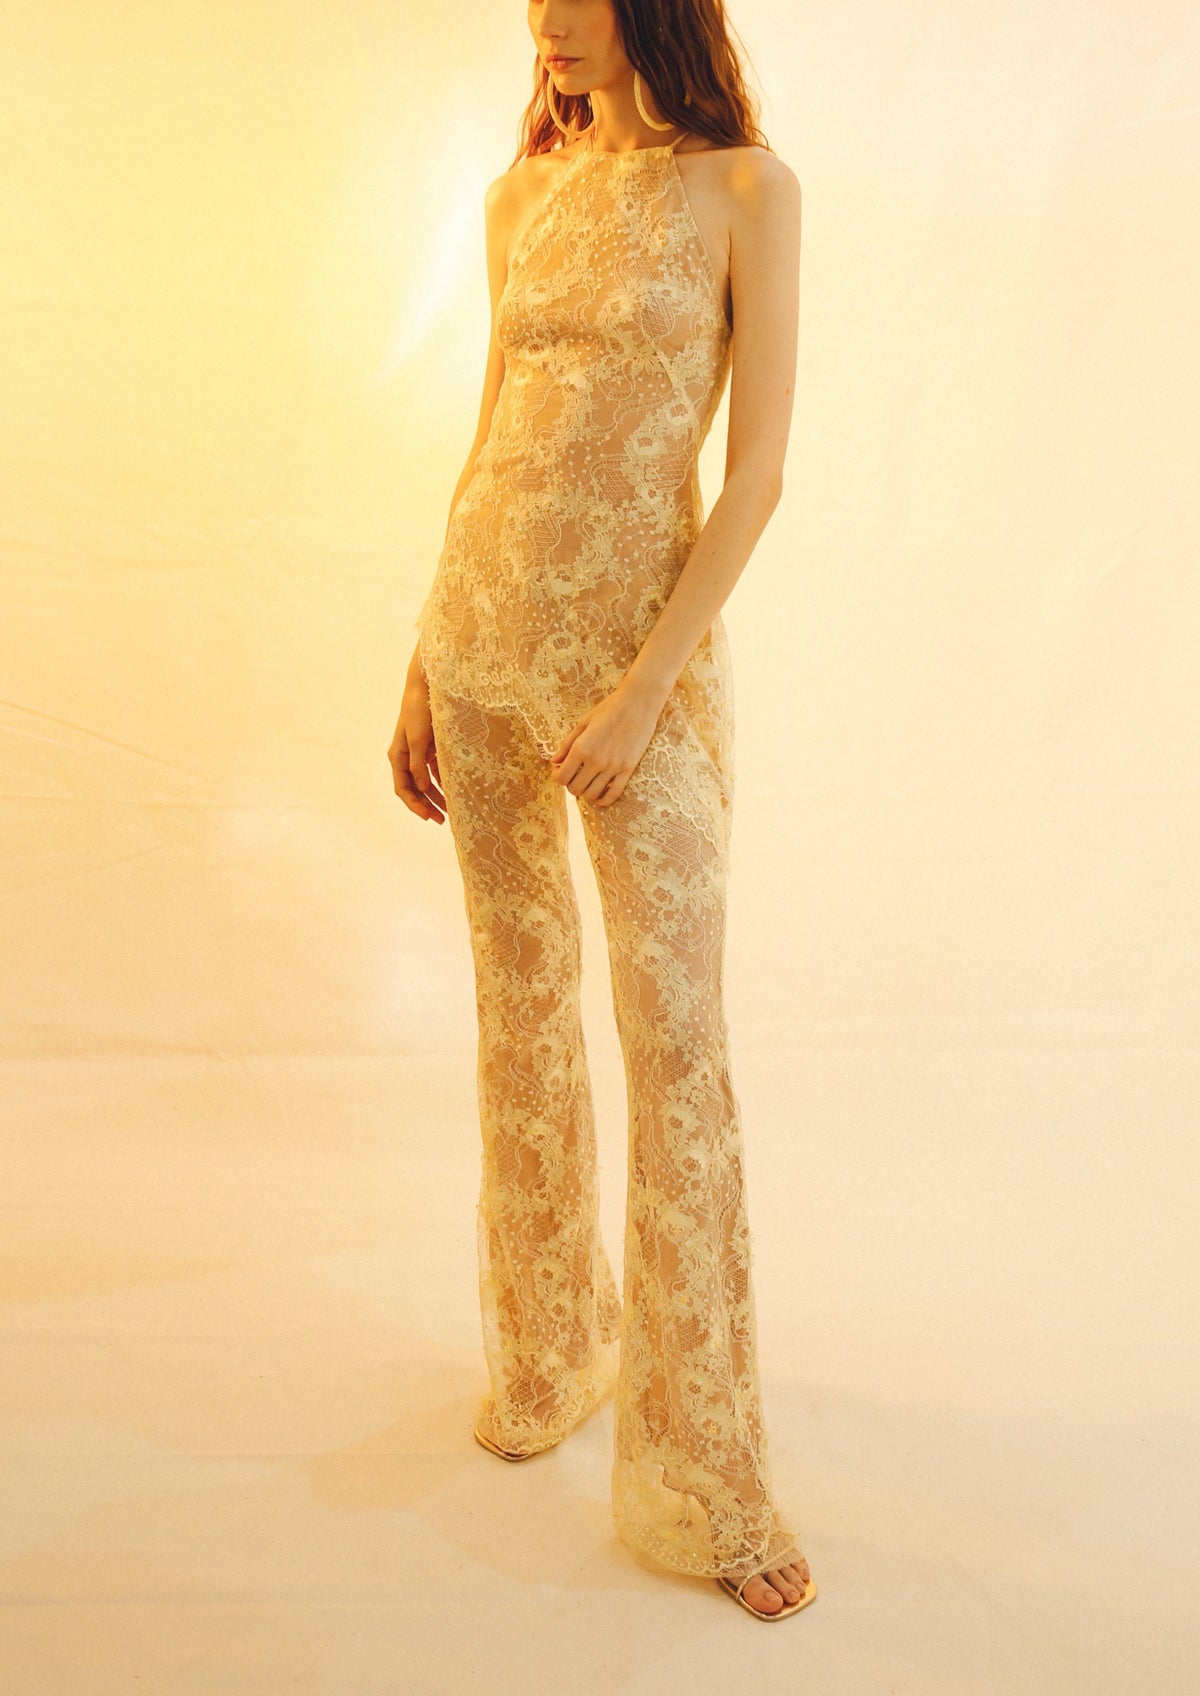 Gracia Lace Pants in Yellow